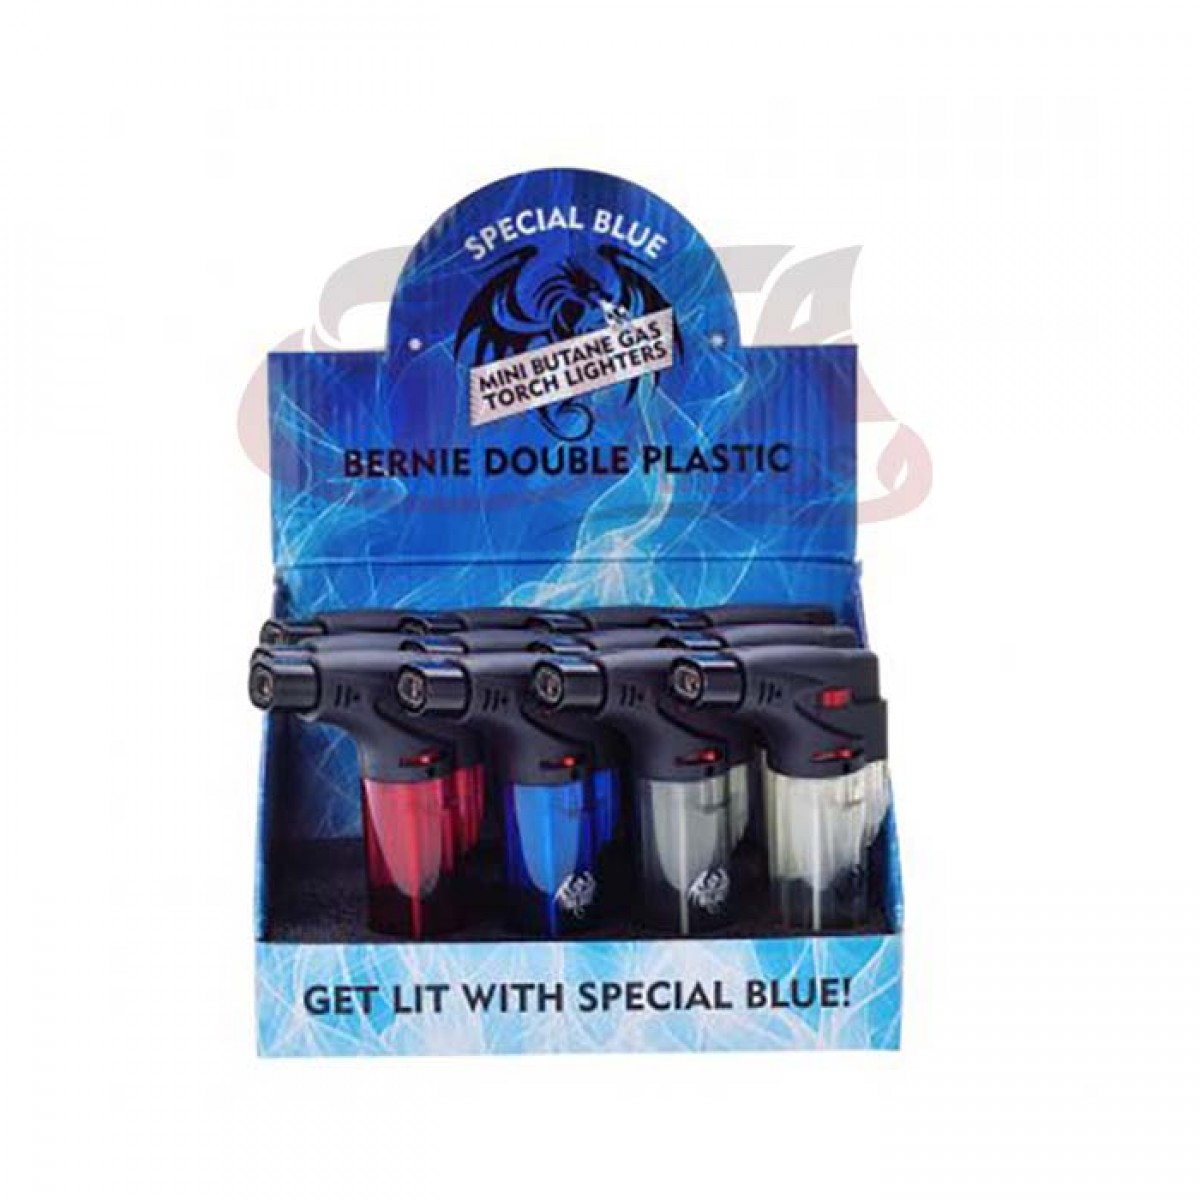 Special Blue - Bernie Double Plastic Lighters - 12PC Display